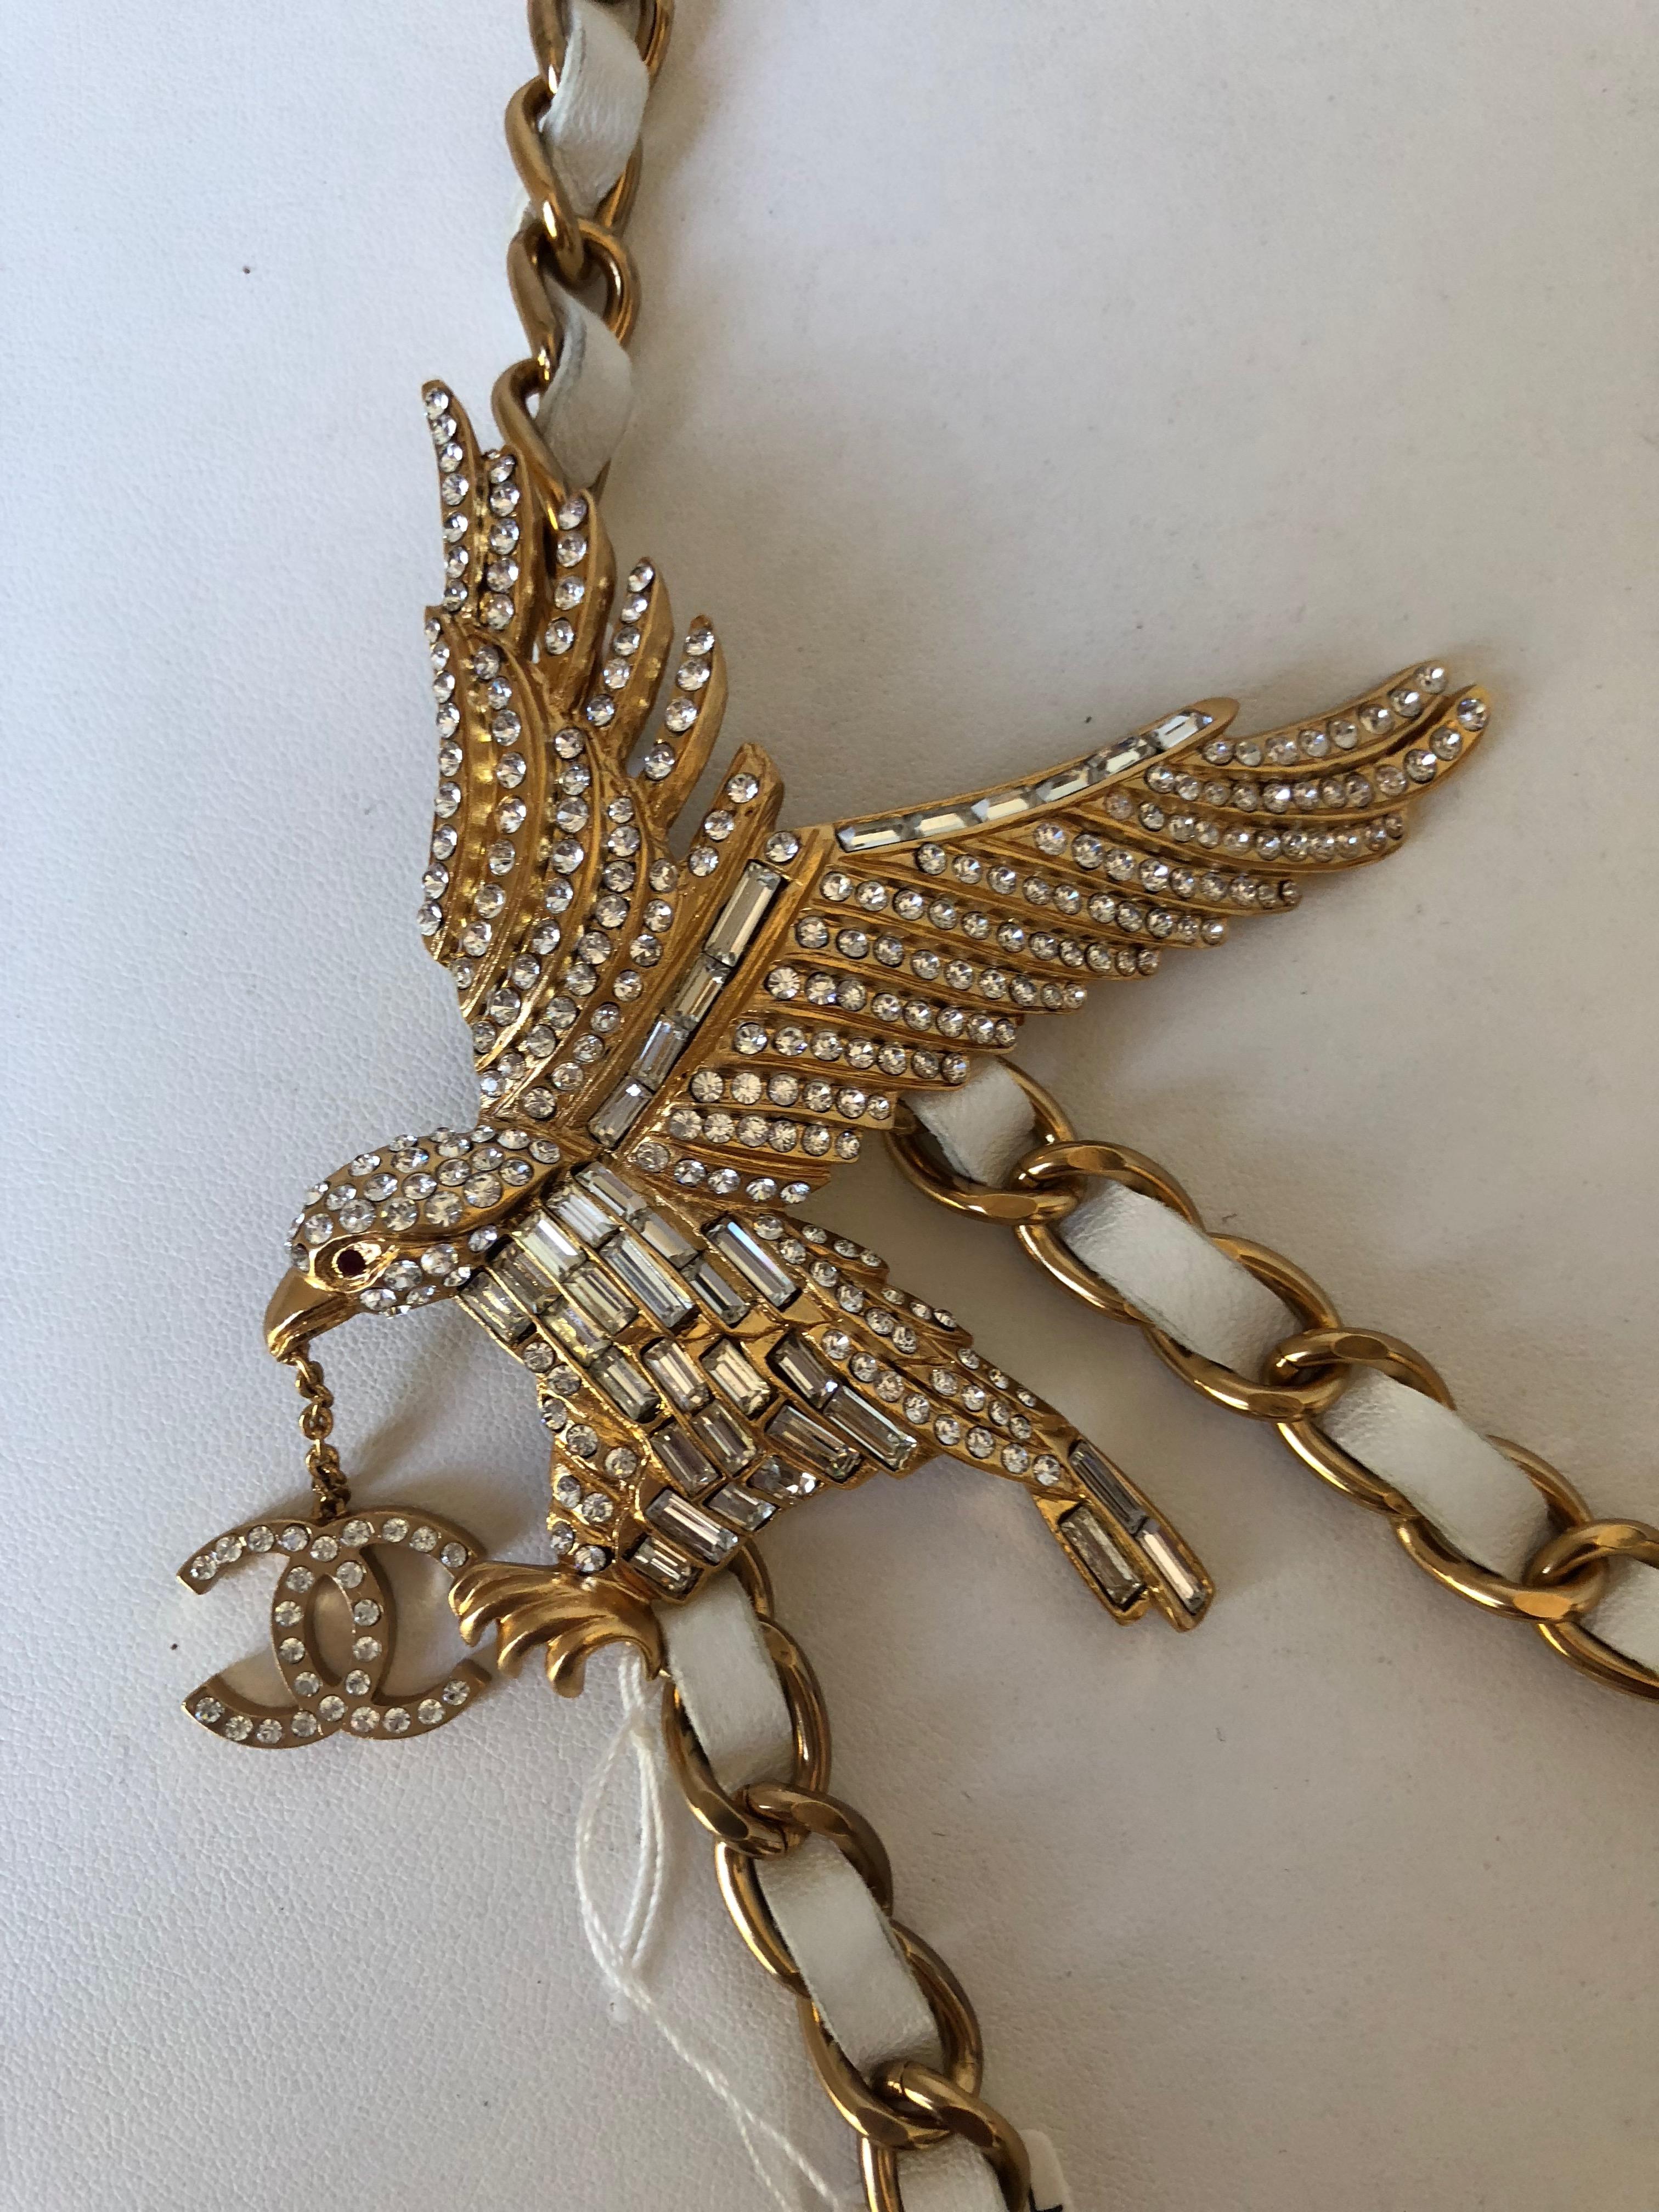 Focal point of the Chanel 2001 Spring Collection.
Rare Chanel belt with white interwoven leather featuring a large jewelled eagle.
May be worn as a belt or a necklace.
